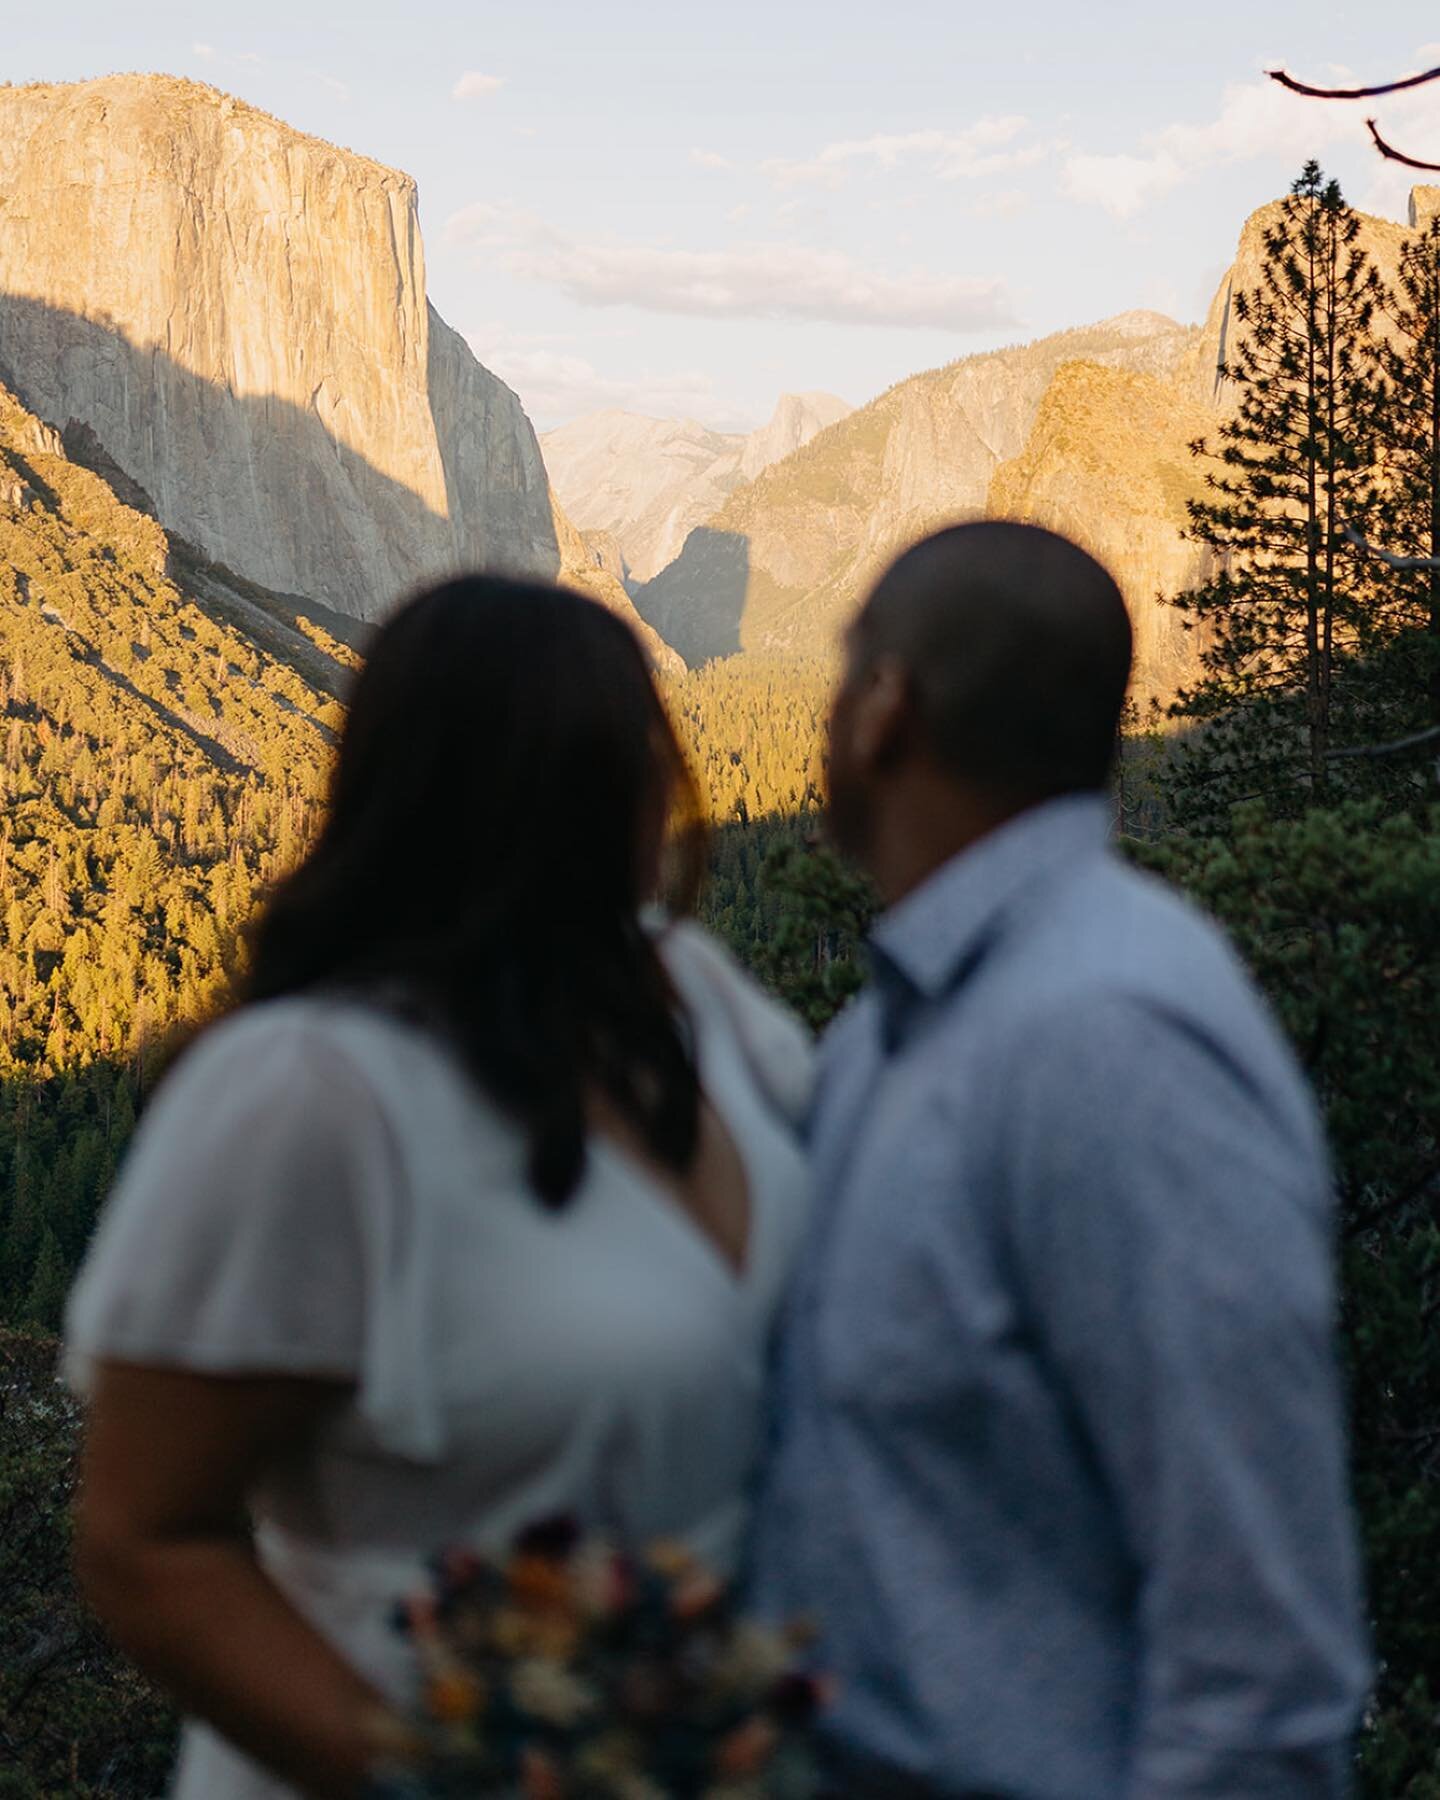 Delivered Brittany &amp; Filiberto&rsquo;s Yosemite elopement gallery last night 💛
I am so amazed by this incredible place and the people it draws. Brittany &amp; Fili decided to take a leap and travel across the country to get married with two witn